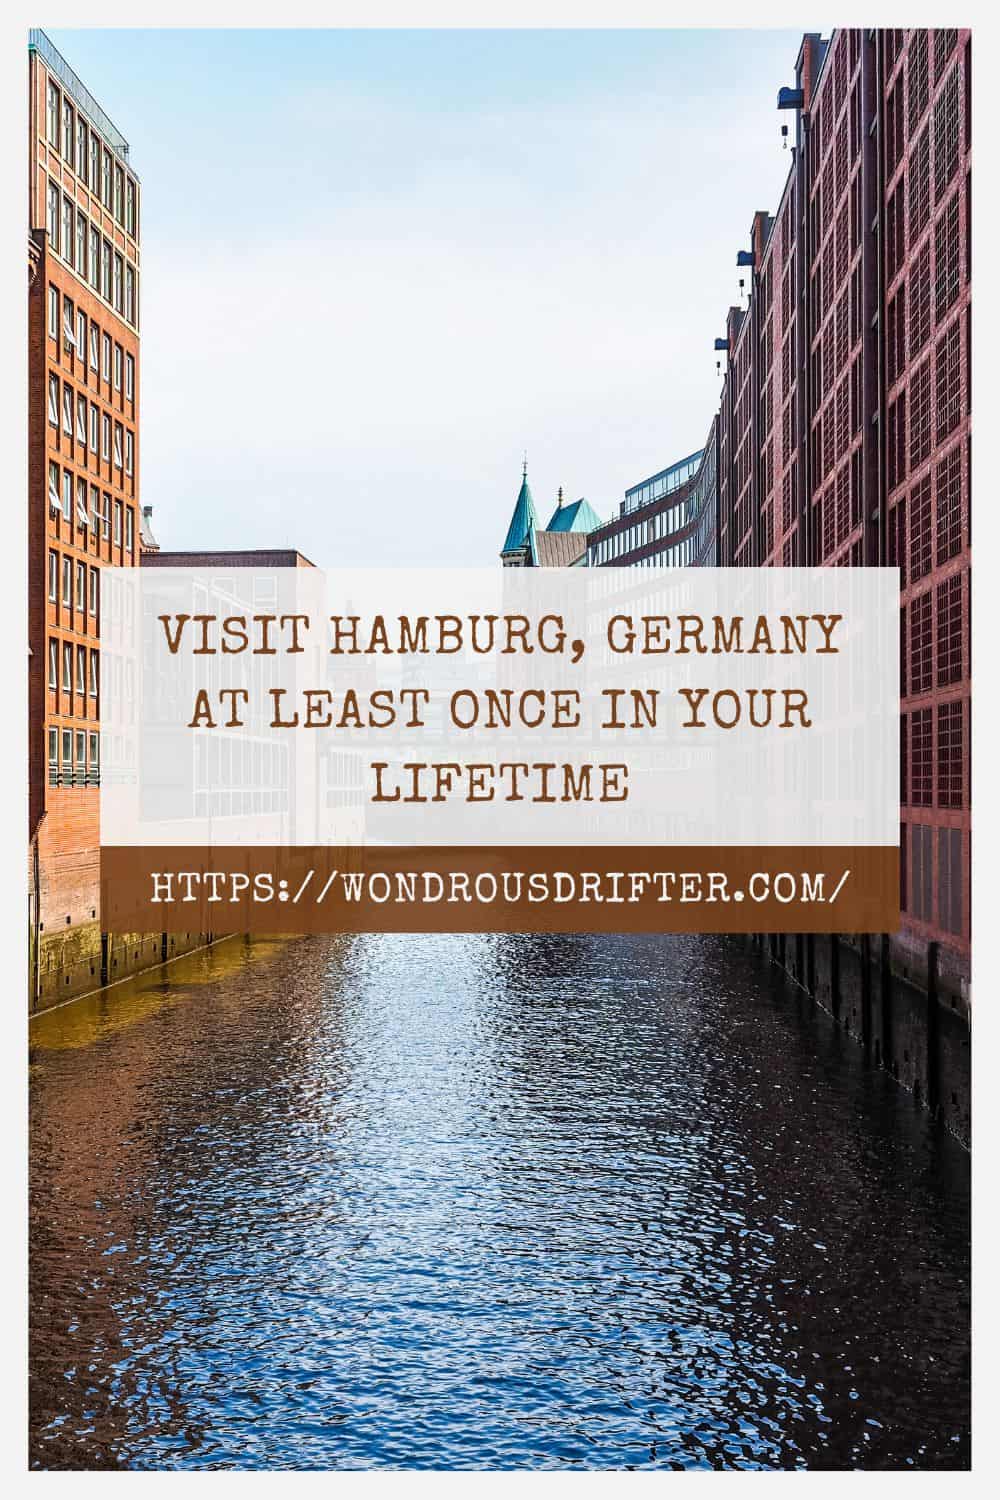 Visit Hamburg Germany at least once in your lifetime